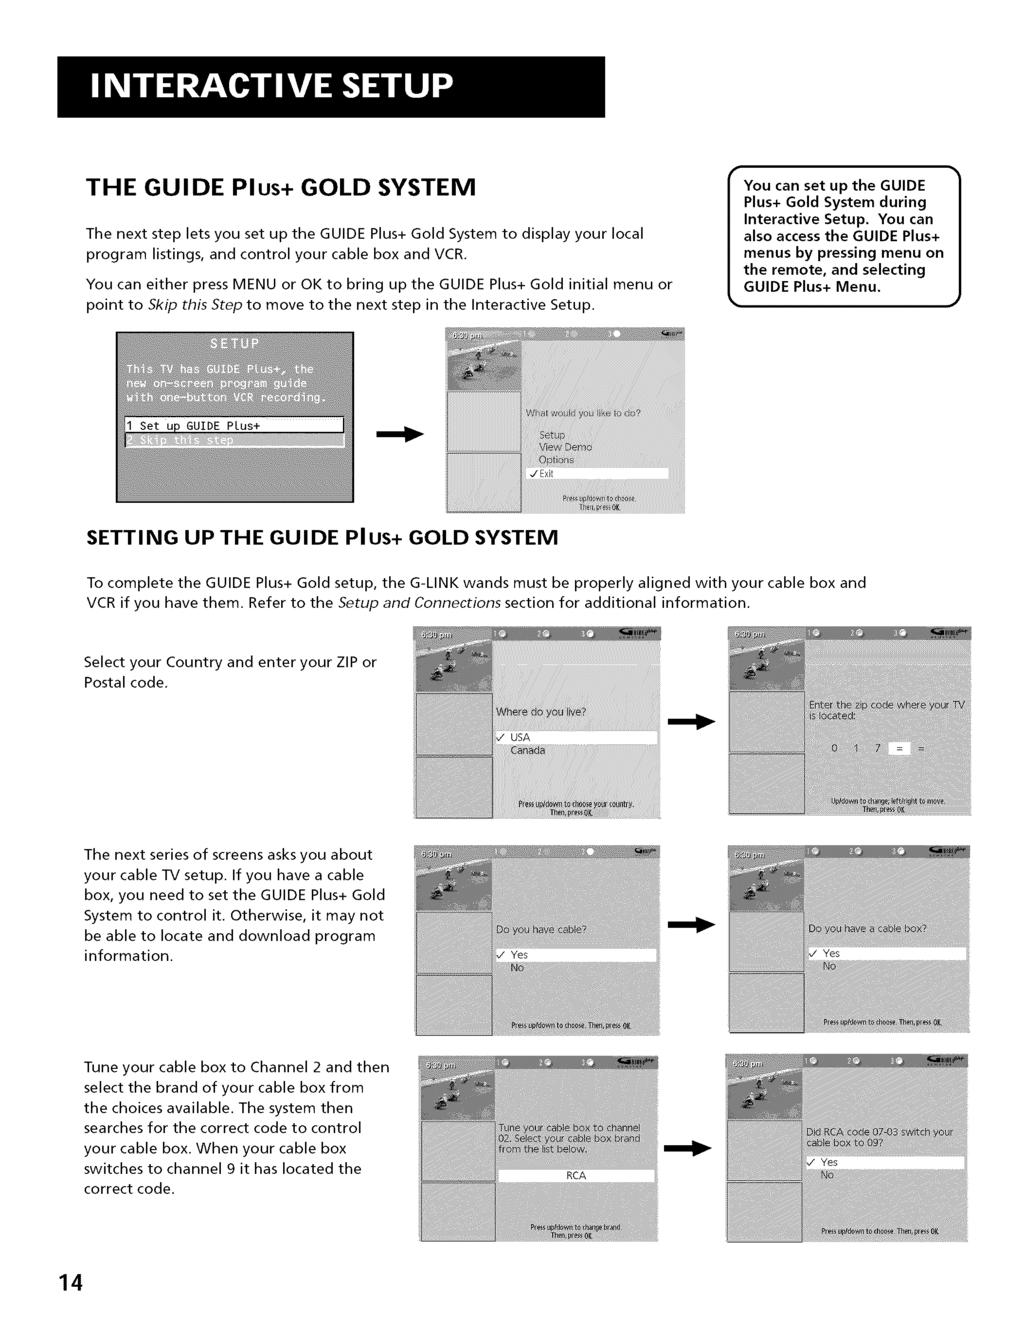 THE GUIDE Plus+ GOLD SYSTEM The next step lets you set up the GUIDE Plus+ Gold System to display your local program listings, and control your cable box and VCR, You can either press MENU or OK to